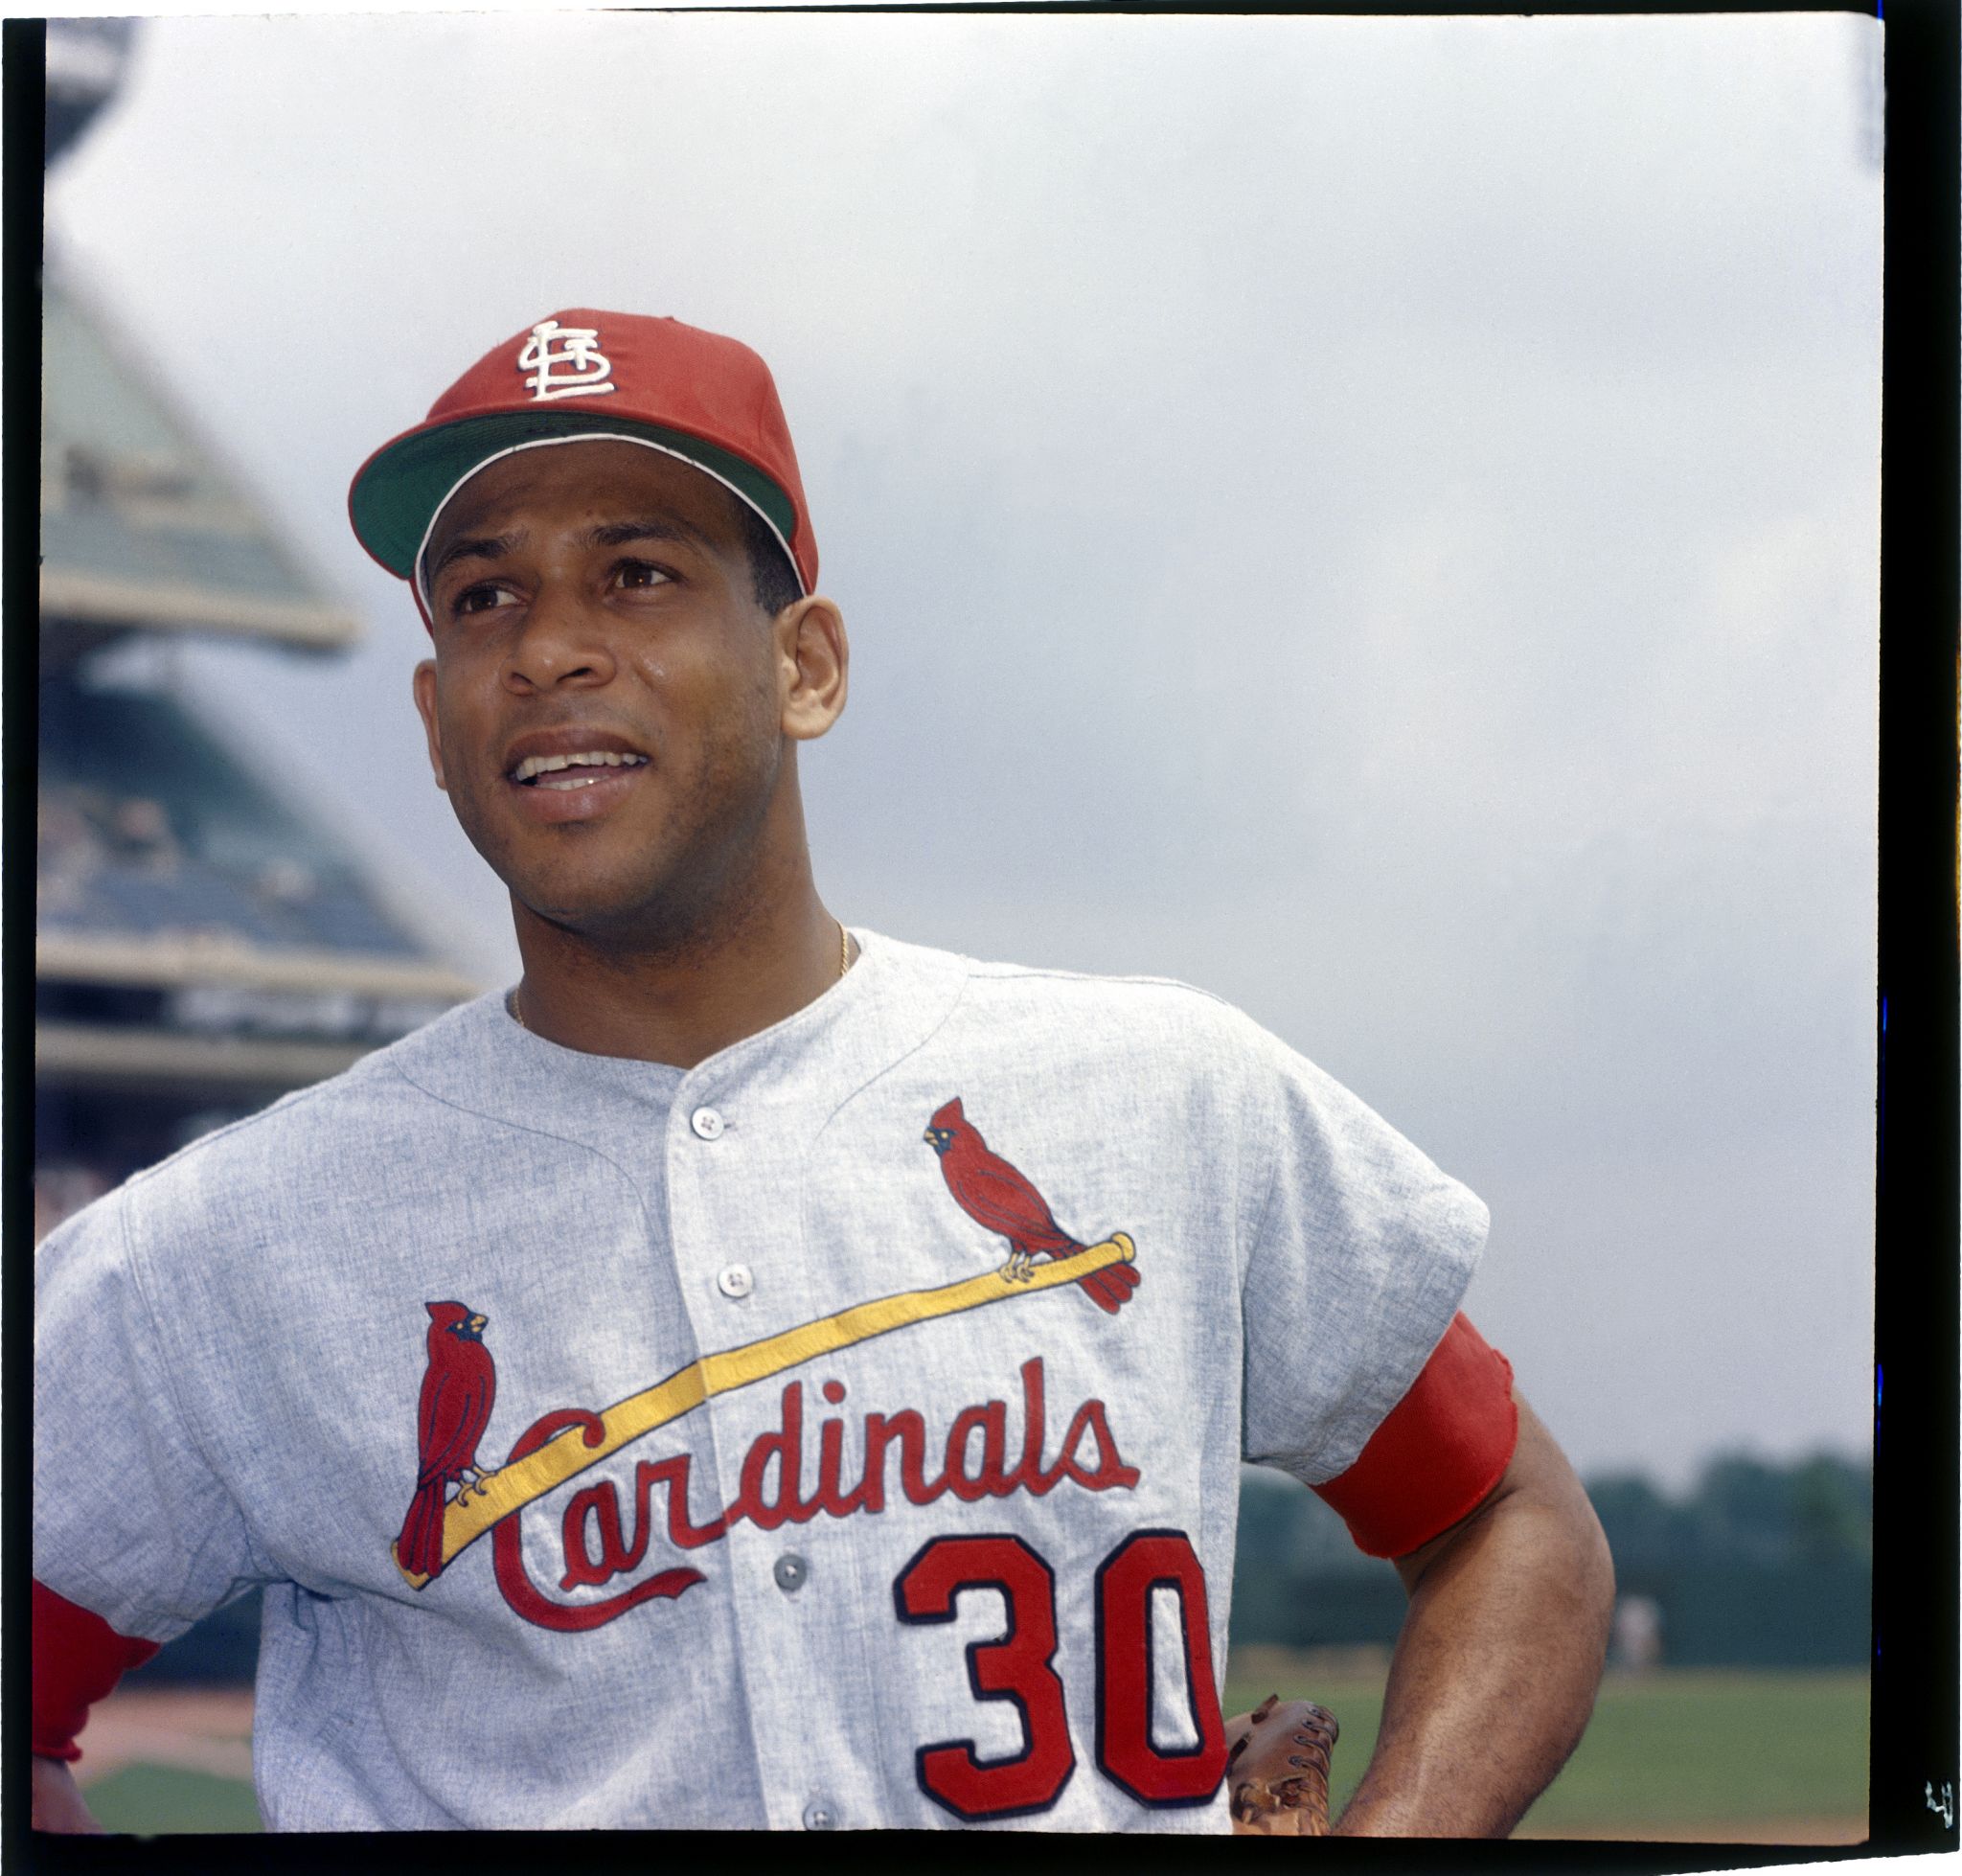 Hall of Fame first baseman Orlando Cepeda, 80, in critical